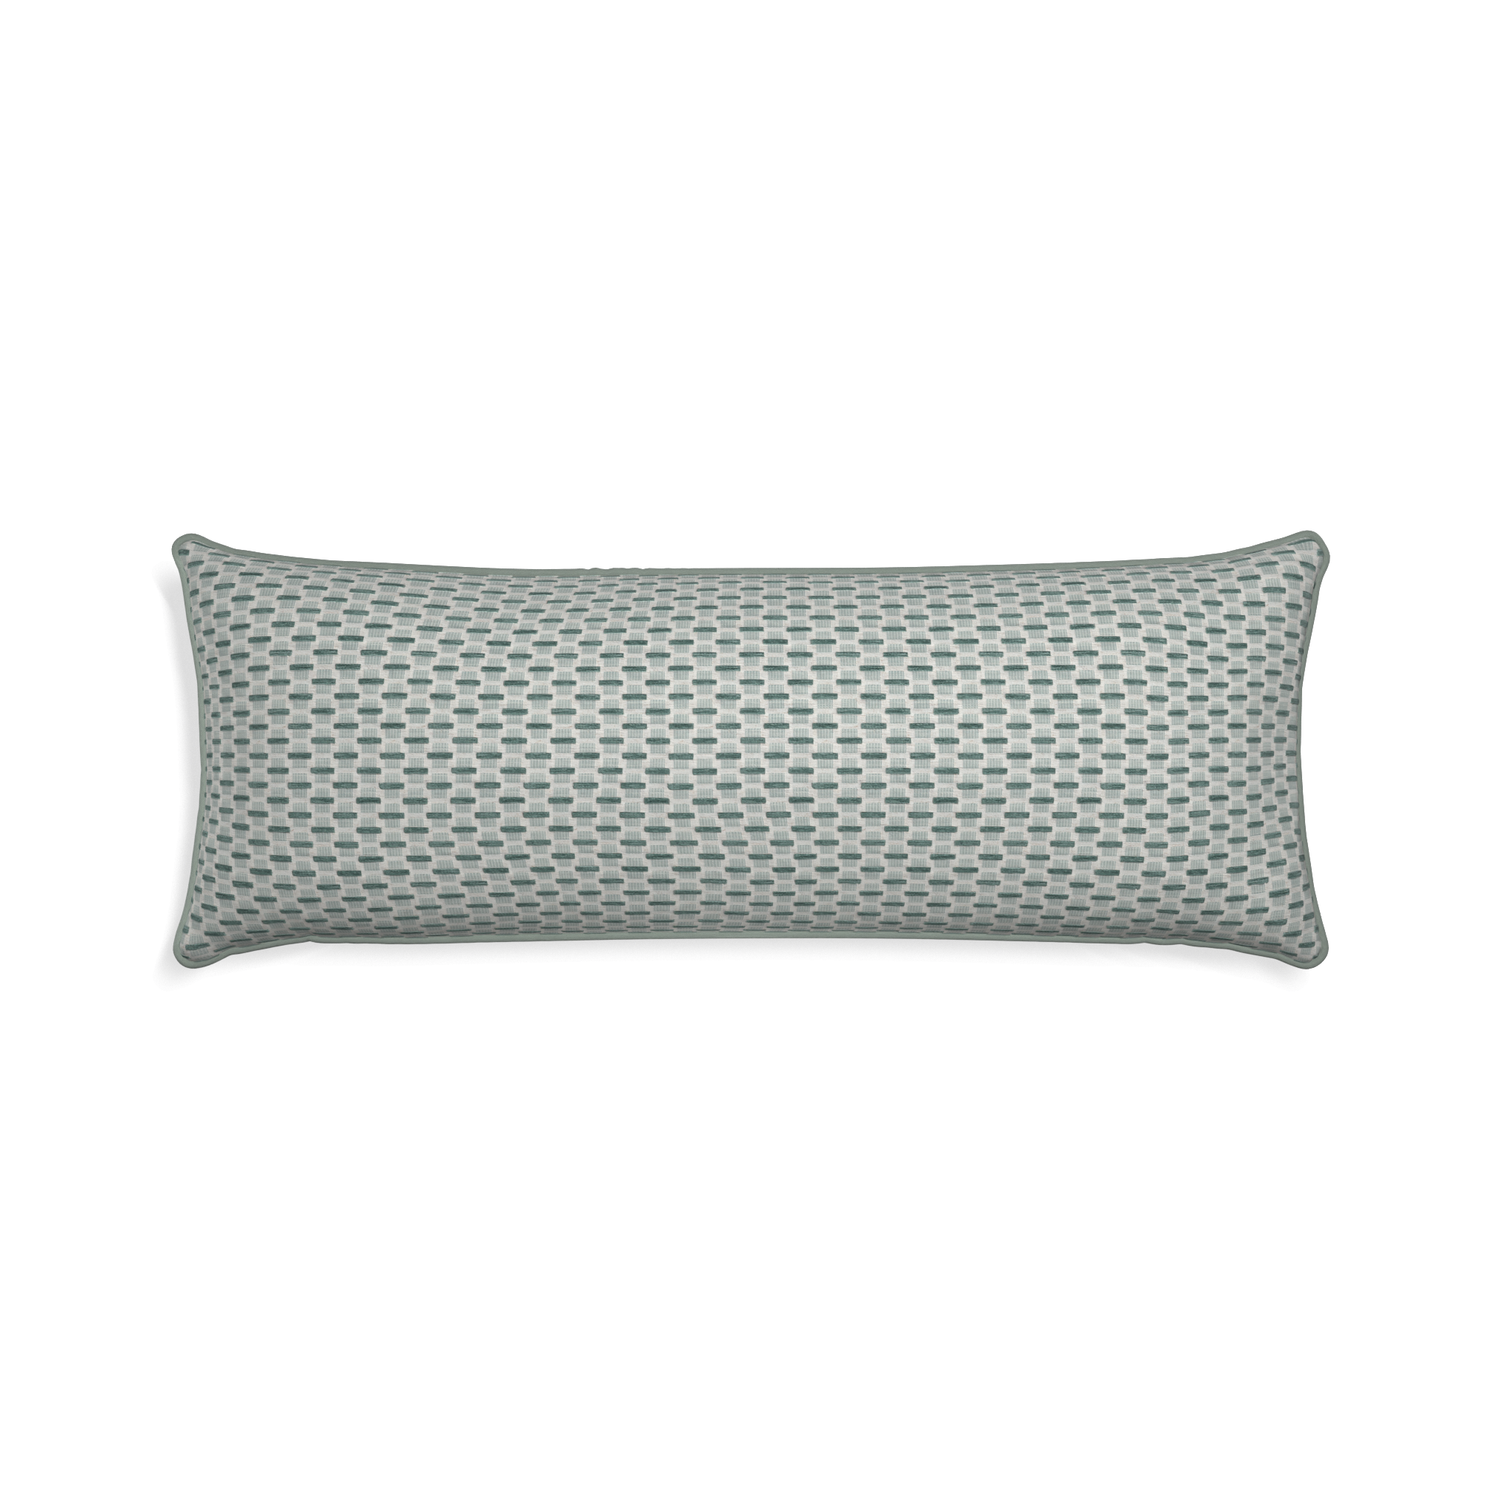 Xl-lumbar willow mint custom green geometric chenillepillow with sage piping on white background